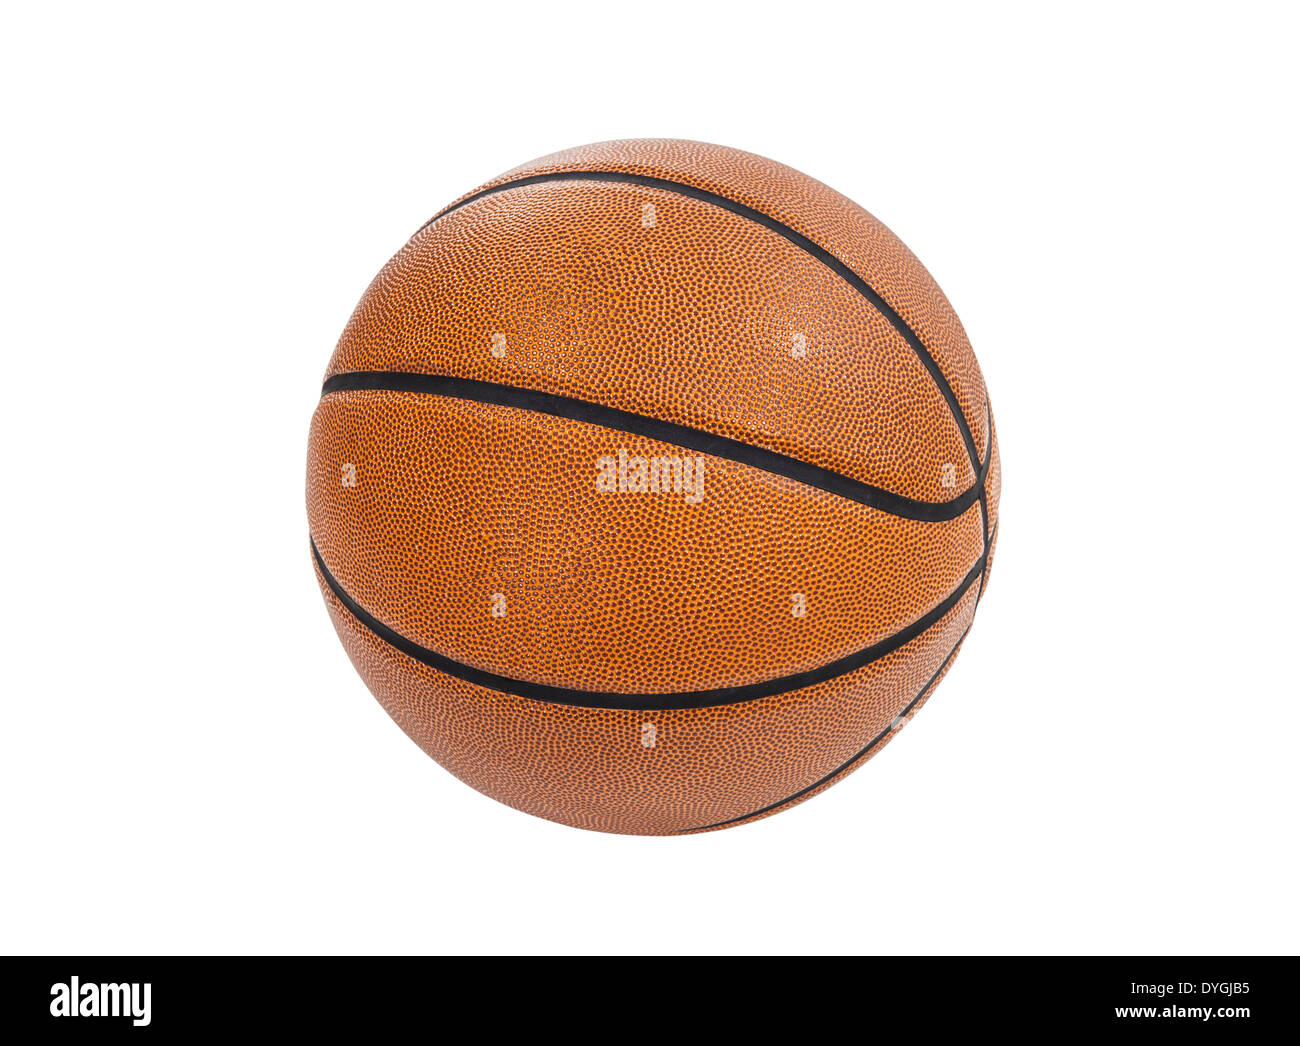 Fresh clean basketball isolated with clipping path. Stock Photo